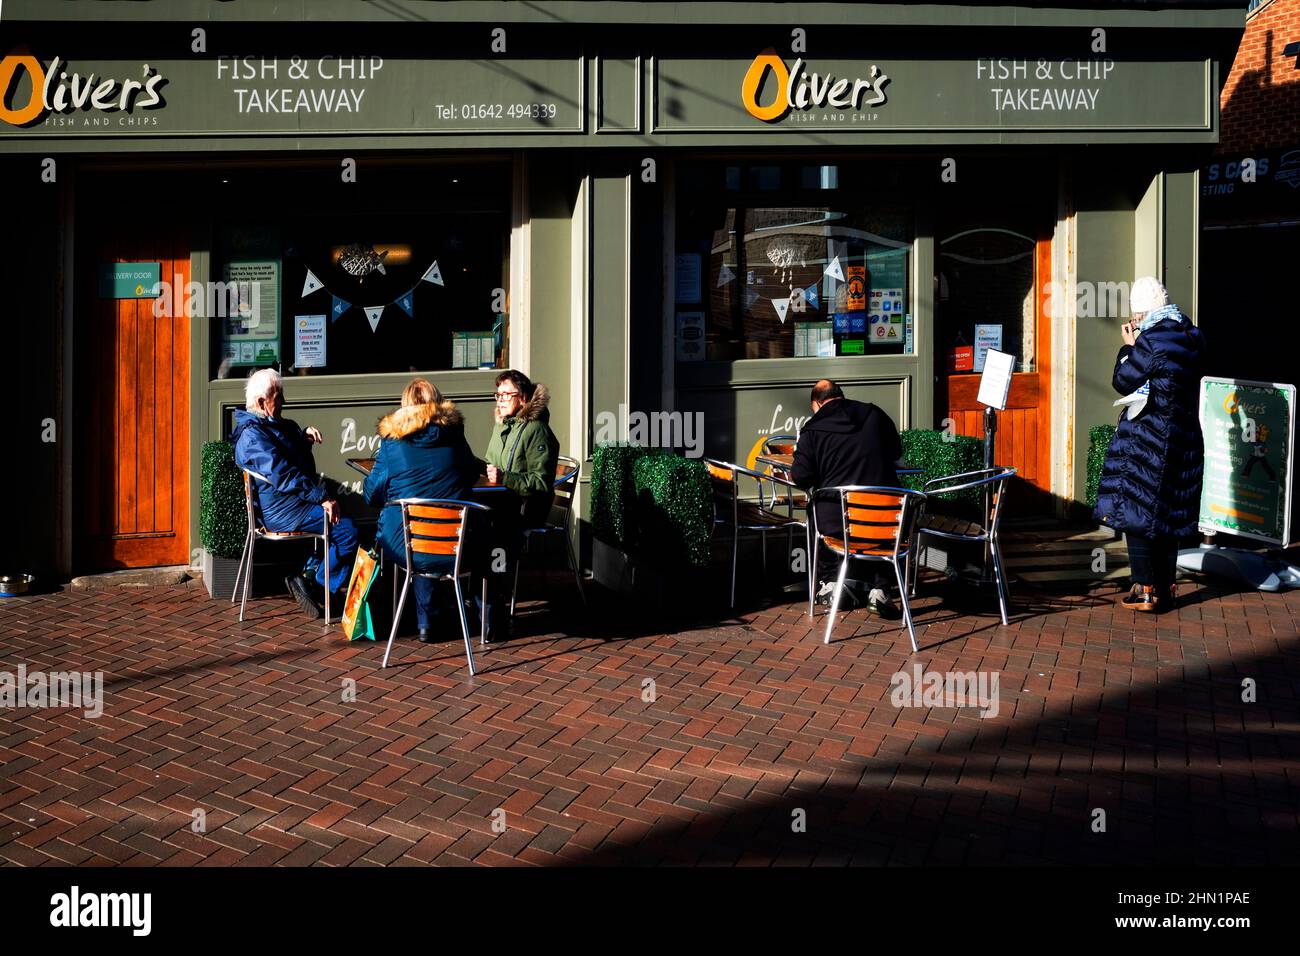 Oliver's Fish and Chip shop Takeaway in Redcar Cleveland North Yorkshire England UK with elderly customers eating outside in fine winter sunshine Stock Photo